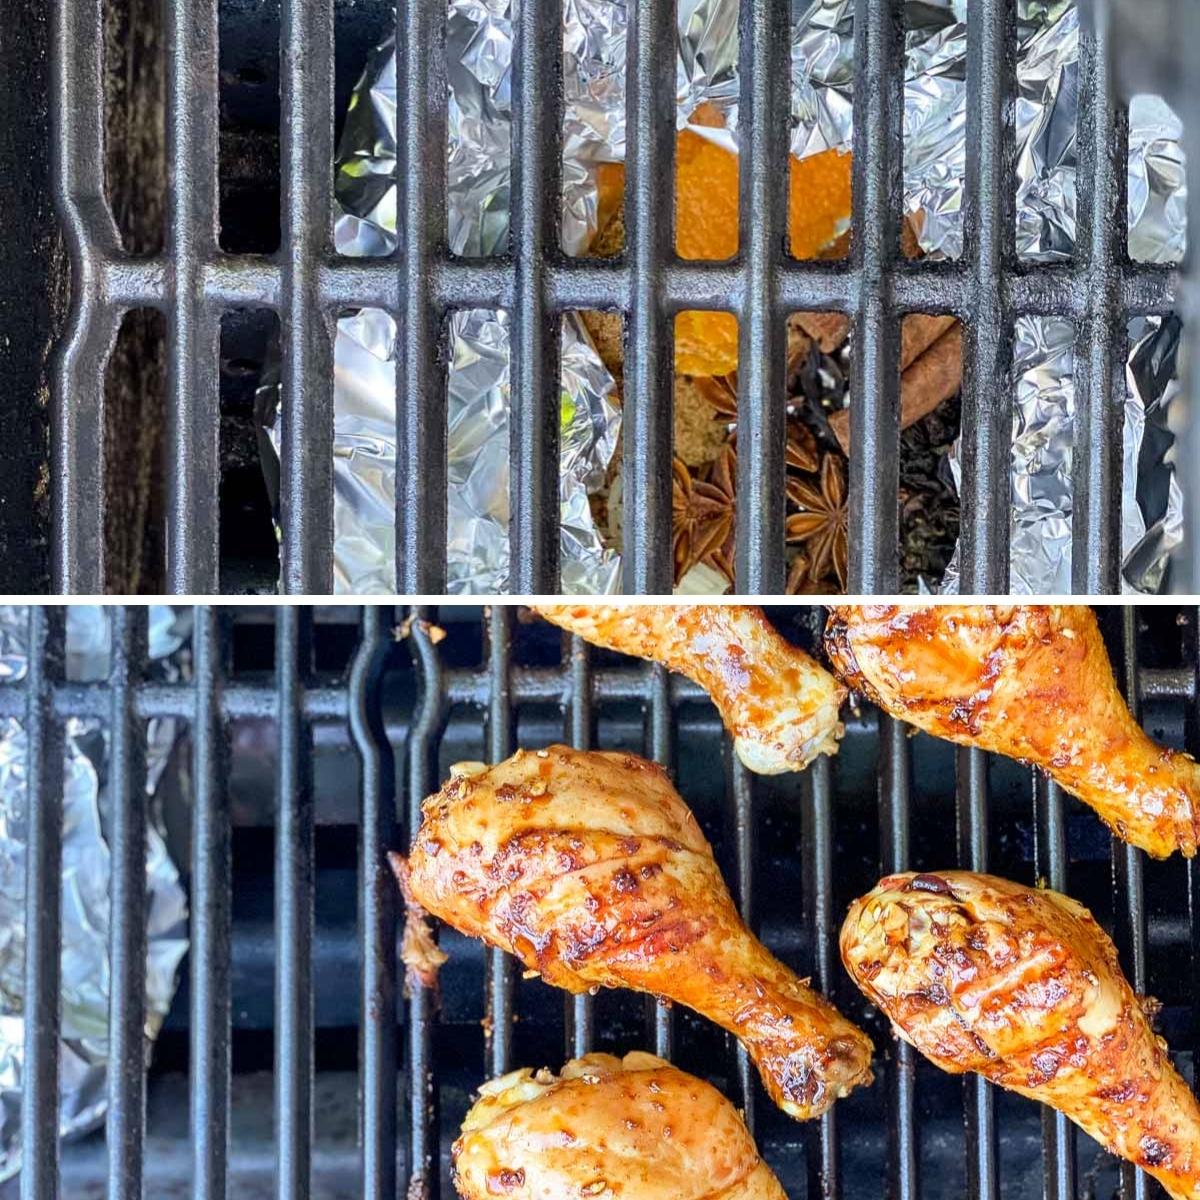 Tea smoking packet under one side of the grill and the chicken legs grilling on the other side of grill.